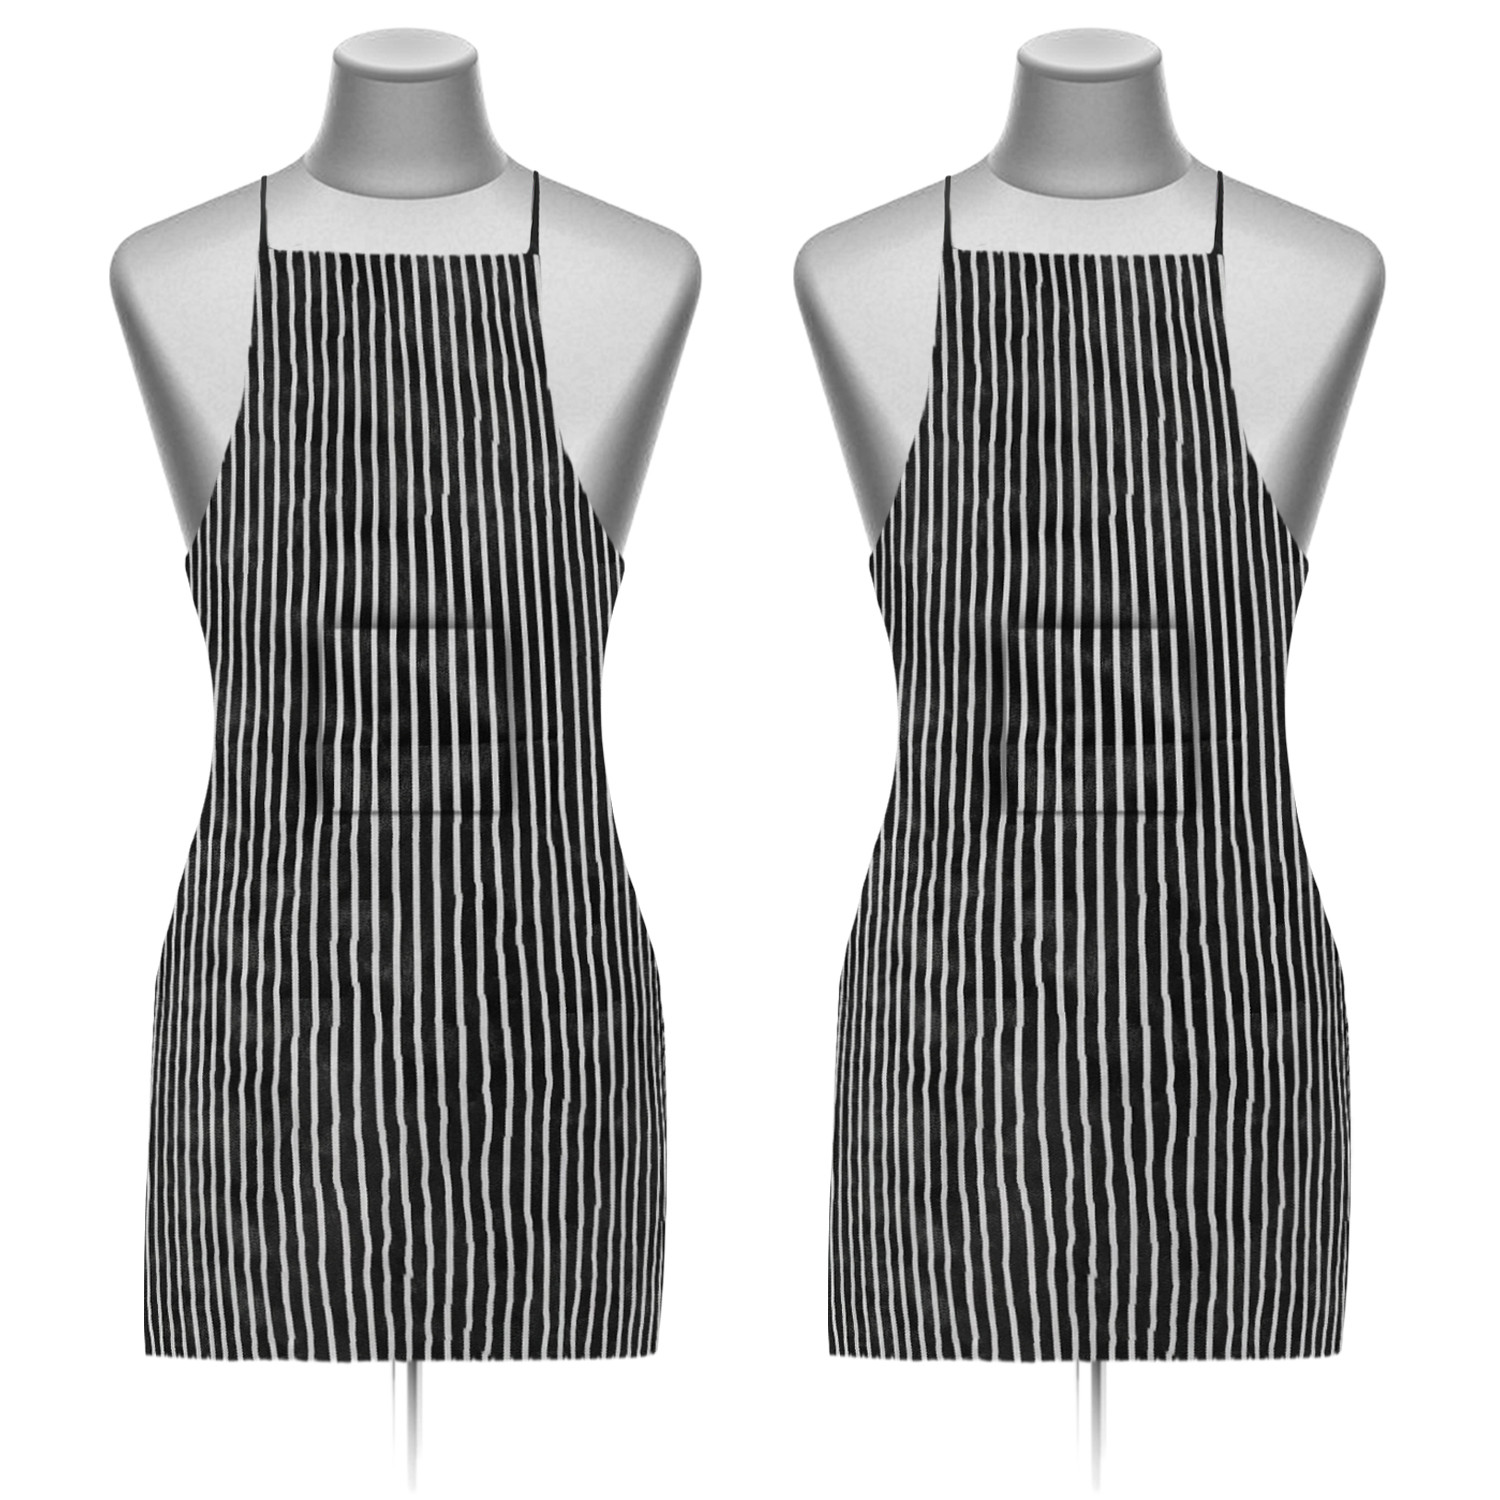 Kuber Industries Linning Printed Apron with 1 Front Pocket (Black & White)